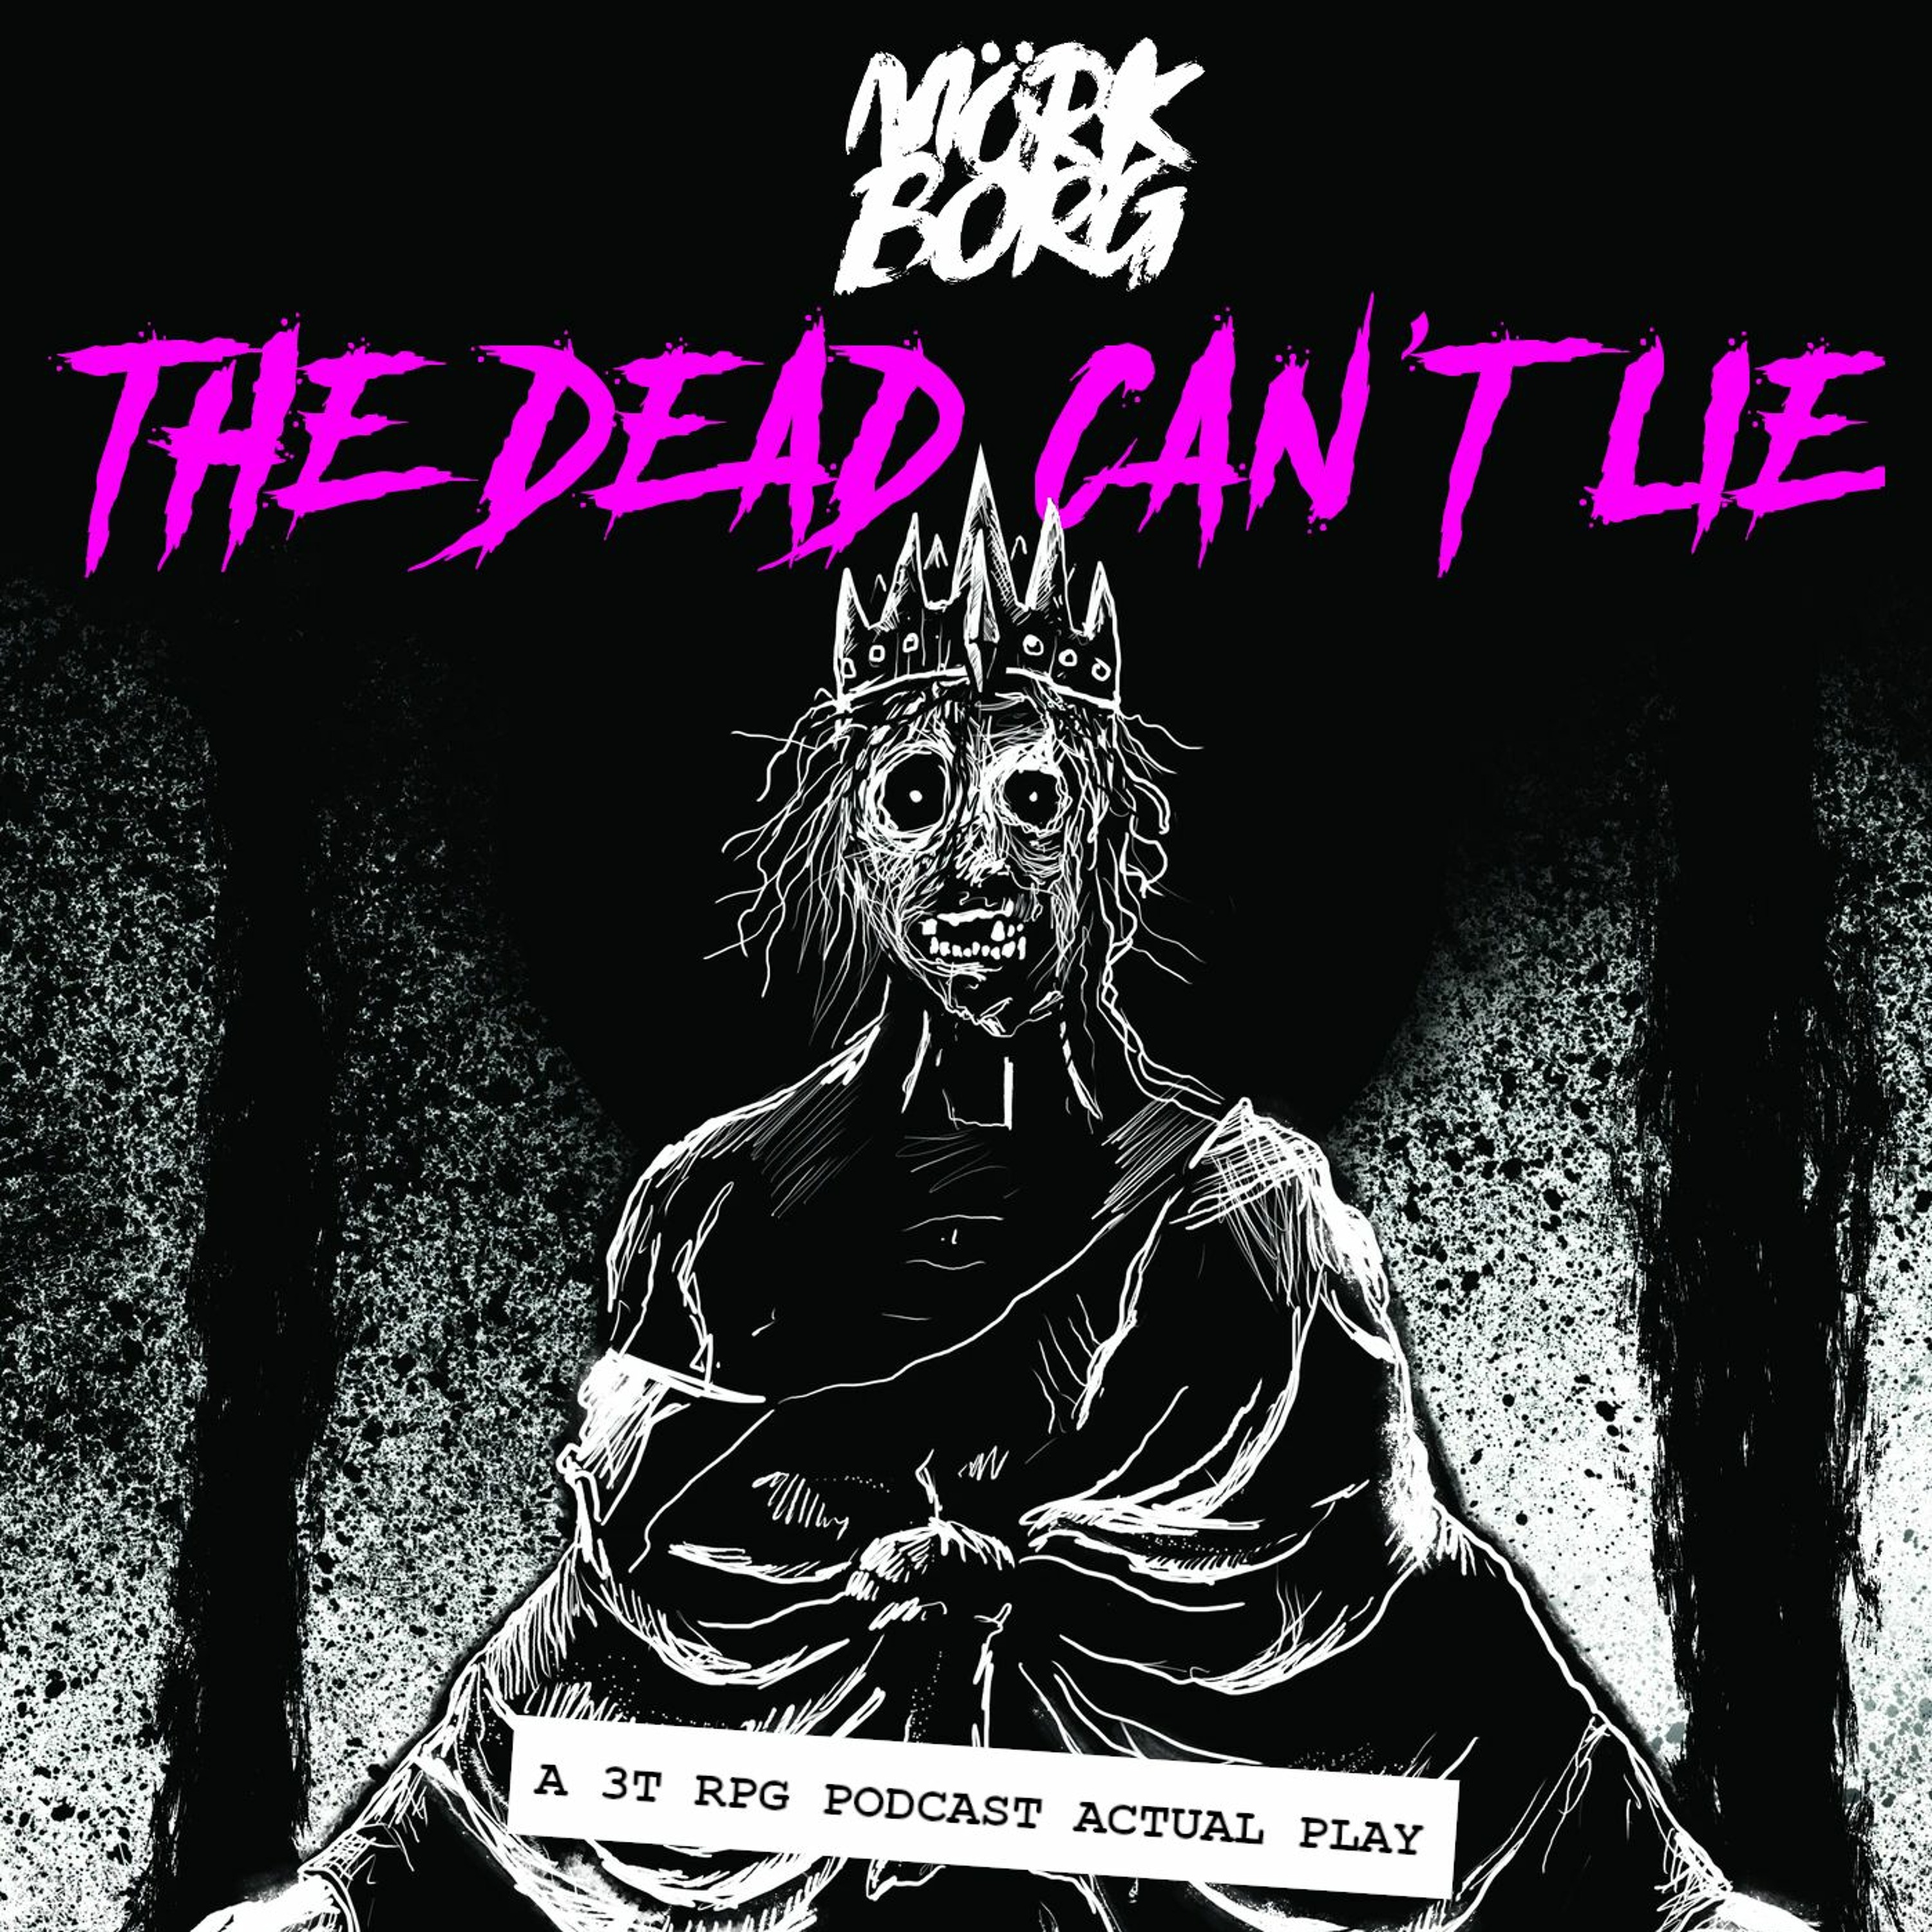 The Dead Can’t Lie 04 - The King (Mörk Borg Actual Play)